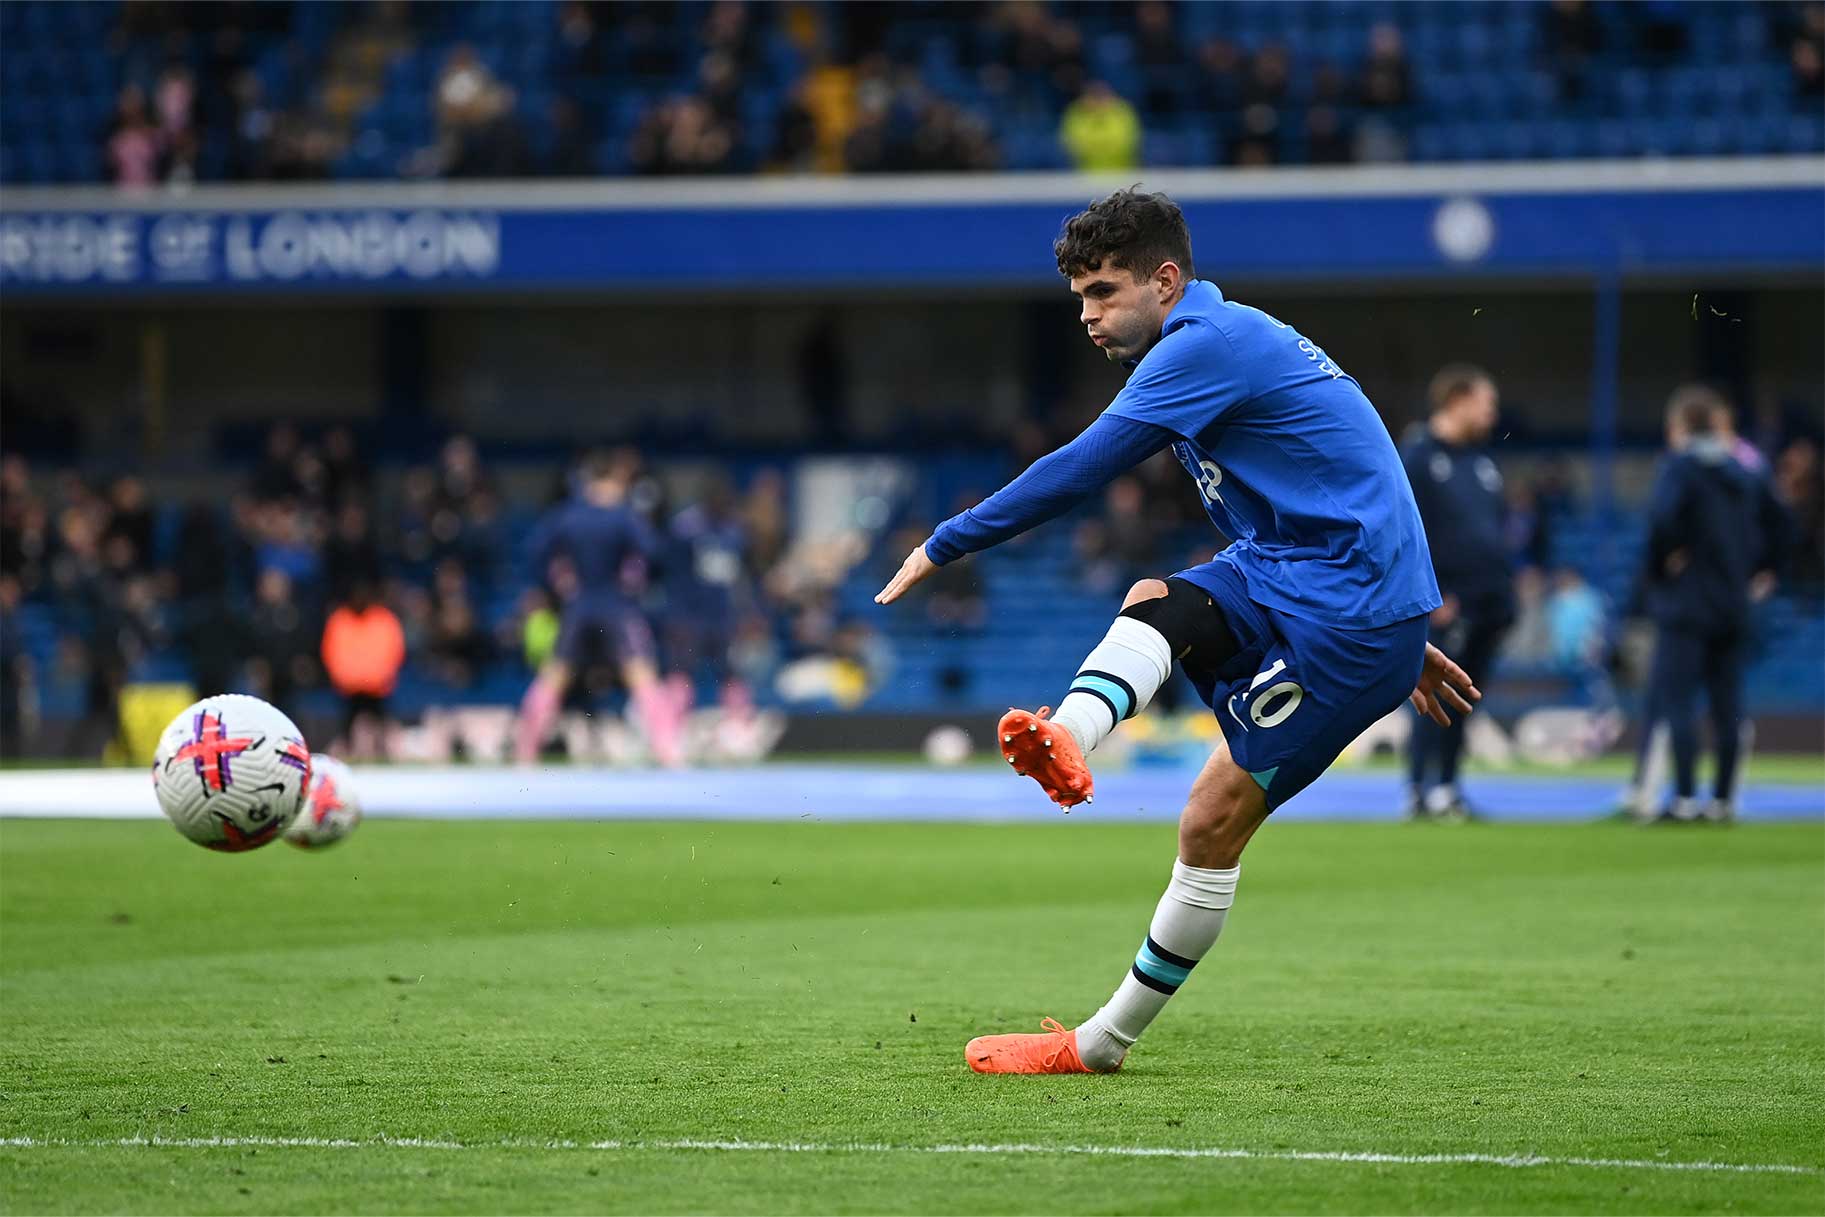 Christian Pulisic of Chelsea warms up prior to the Premier League match between Chelsea FC and Everton FC at Stamford Bridge